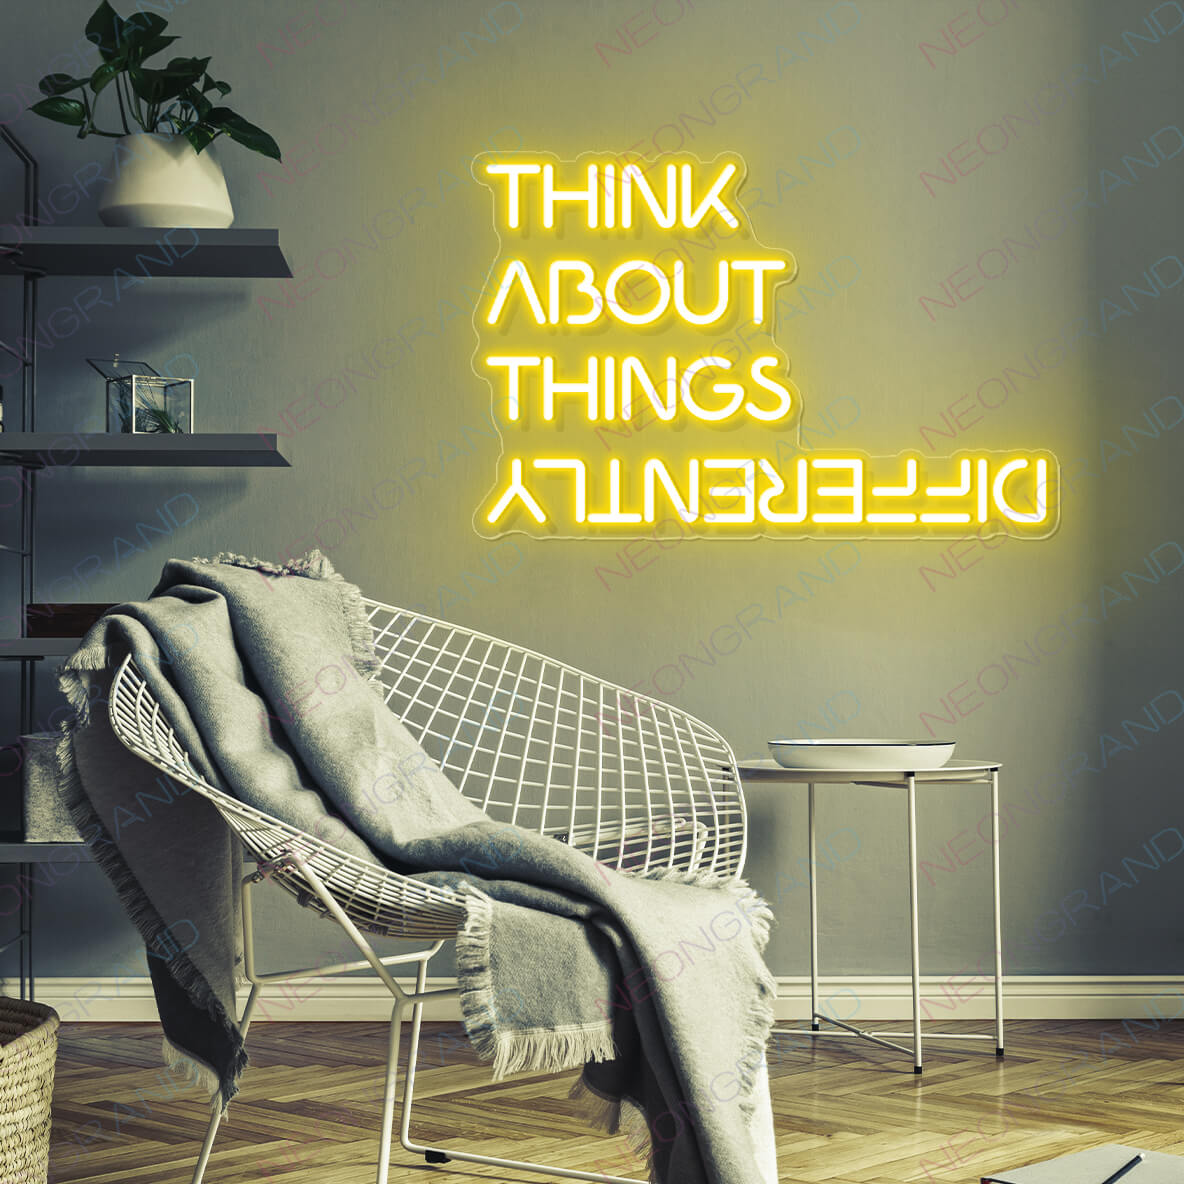 Think About Things Differently Neon Sign Led Light yellow